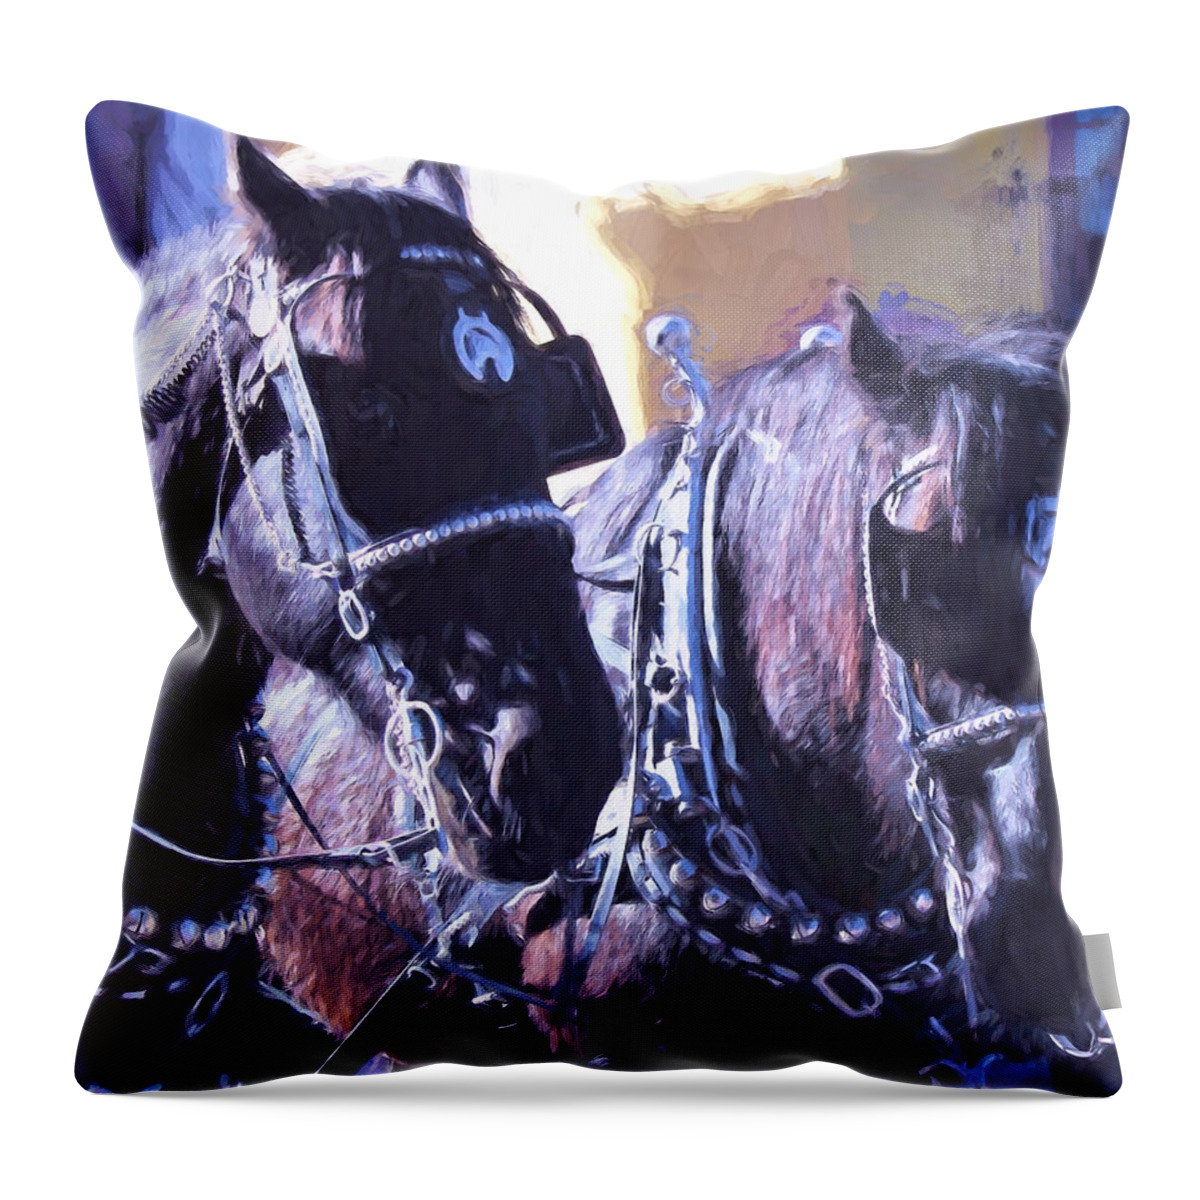 Horses Throw Pillow featuring the digital art Horses #2 by Cathy Anderson